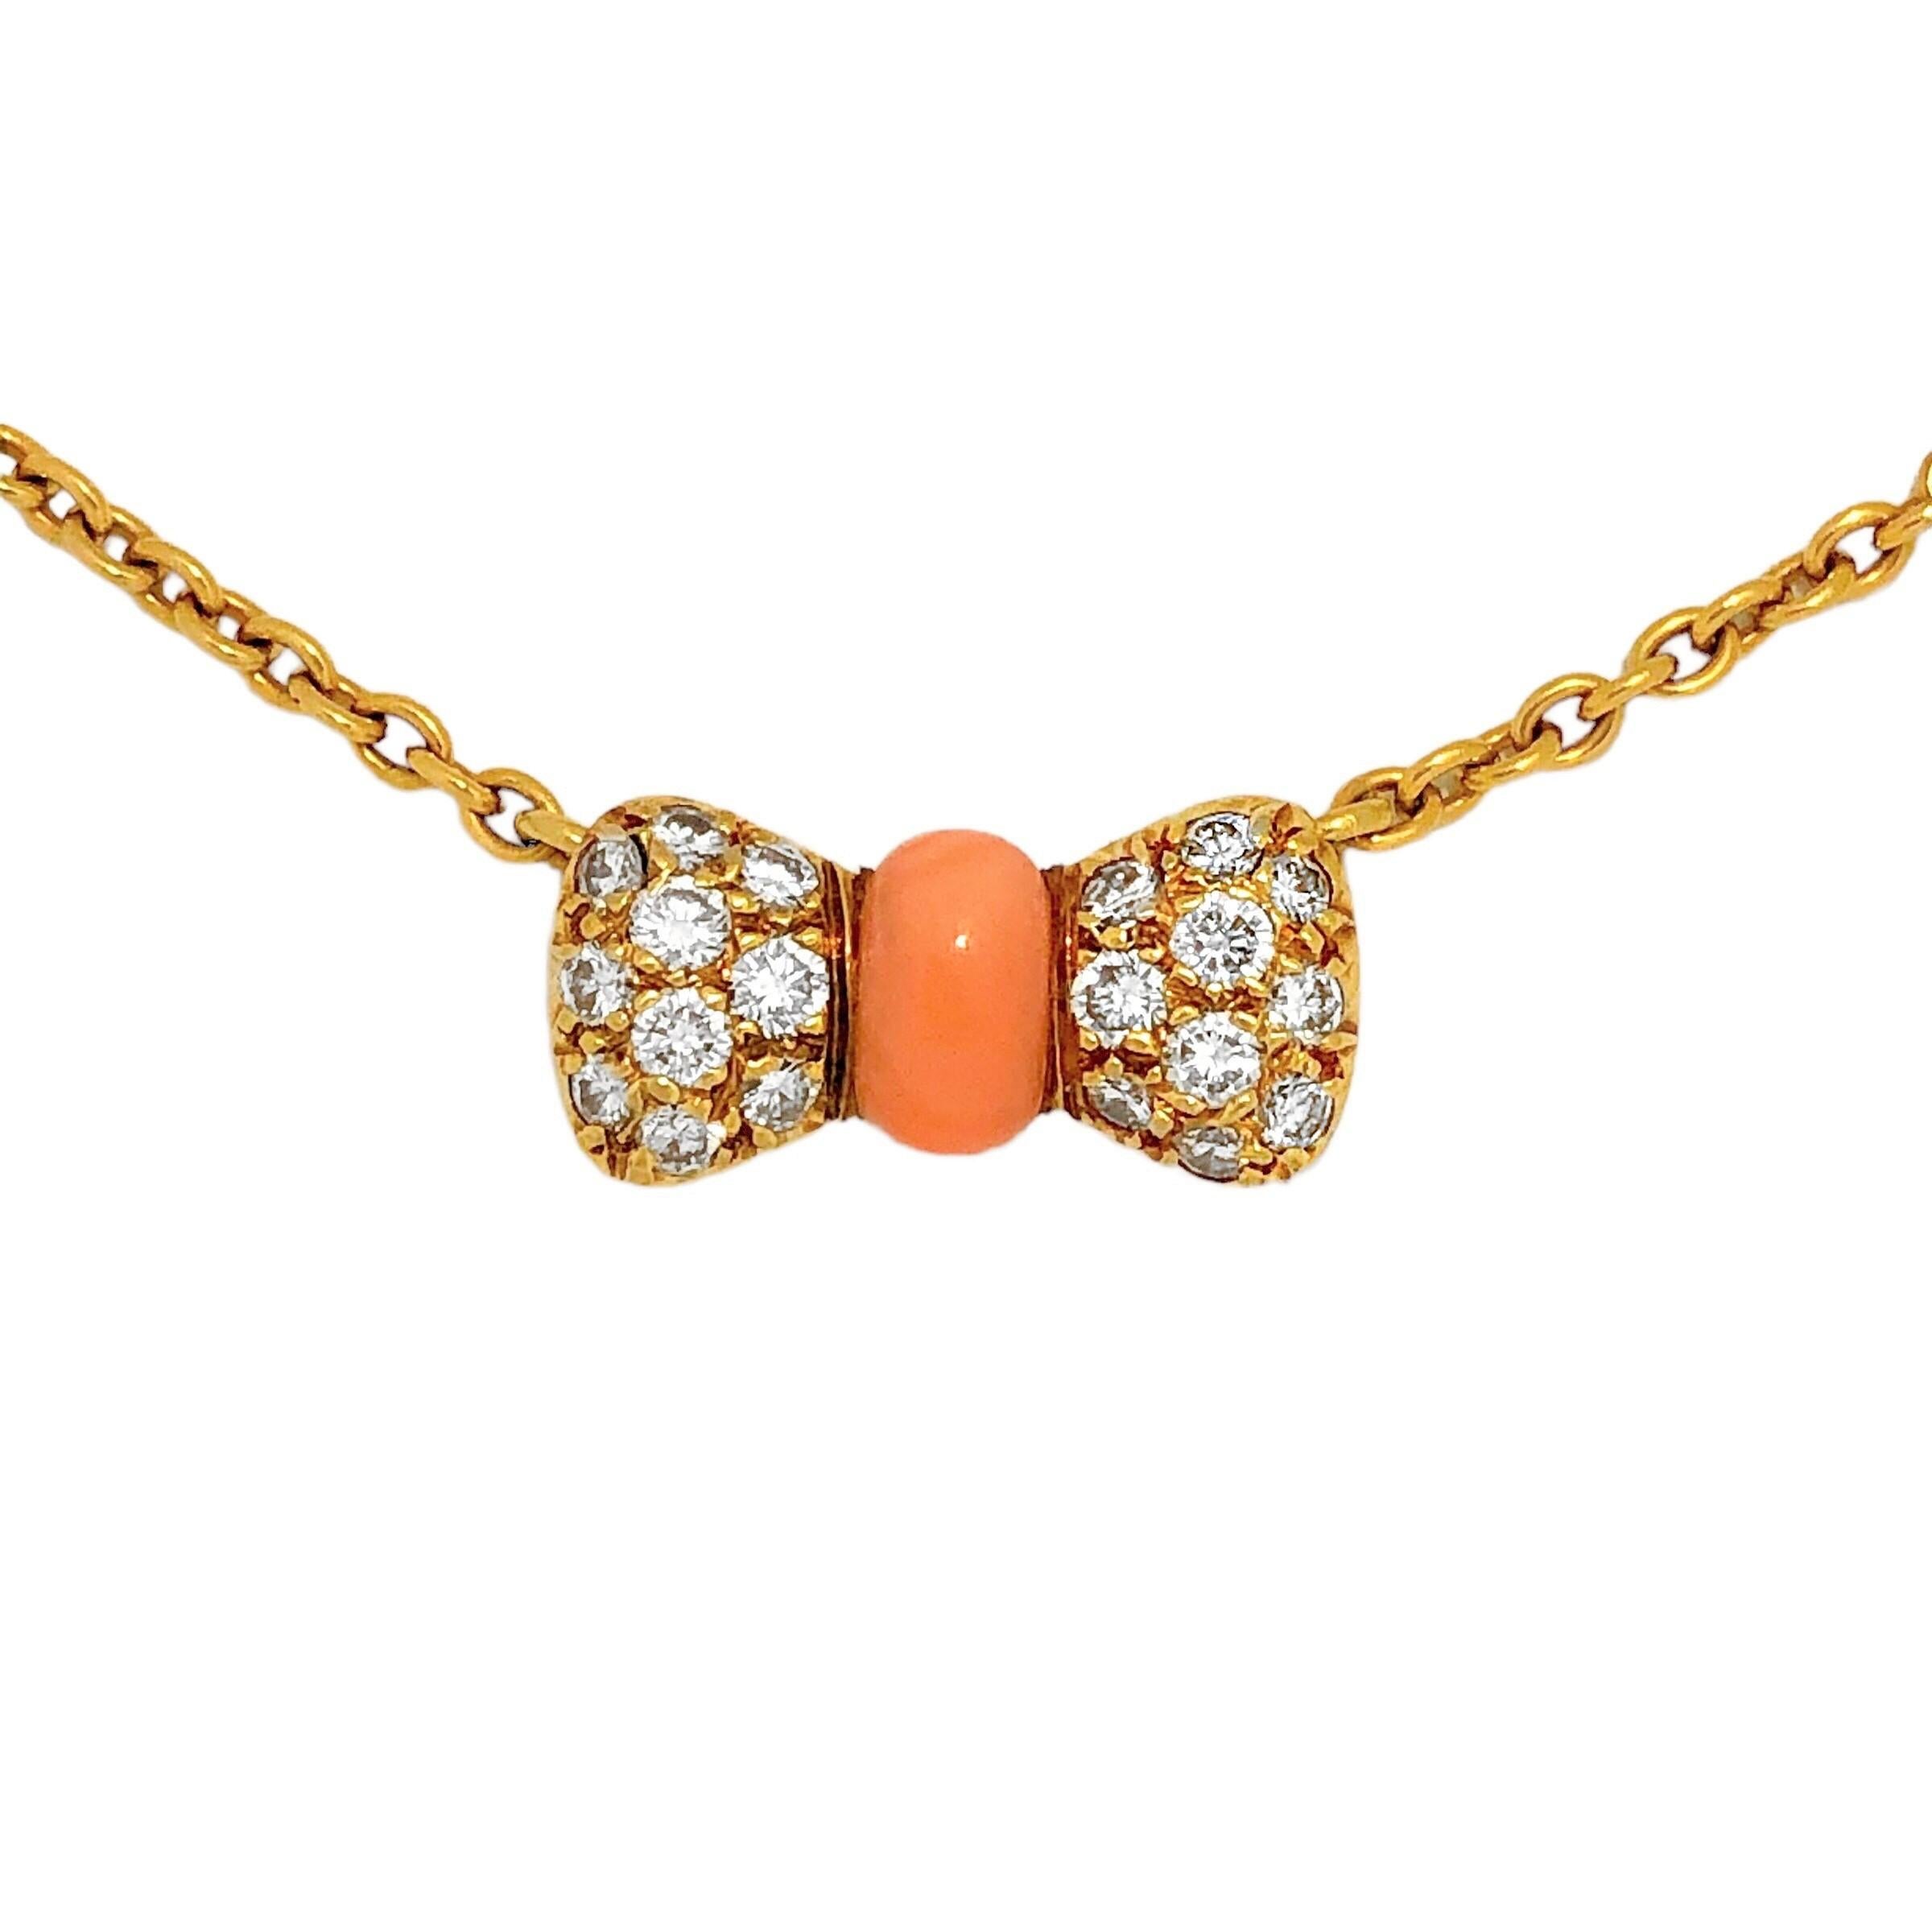 This lovely and very feminine VCA necklace is crafted from 18K yellow gold, fine quality brilliant cut diamonds and bright Angel Skin coral. The bow at the center measures approximately 9/16 inches by 5/16 inches and is suspended from a VCA light